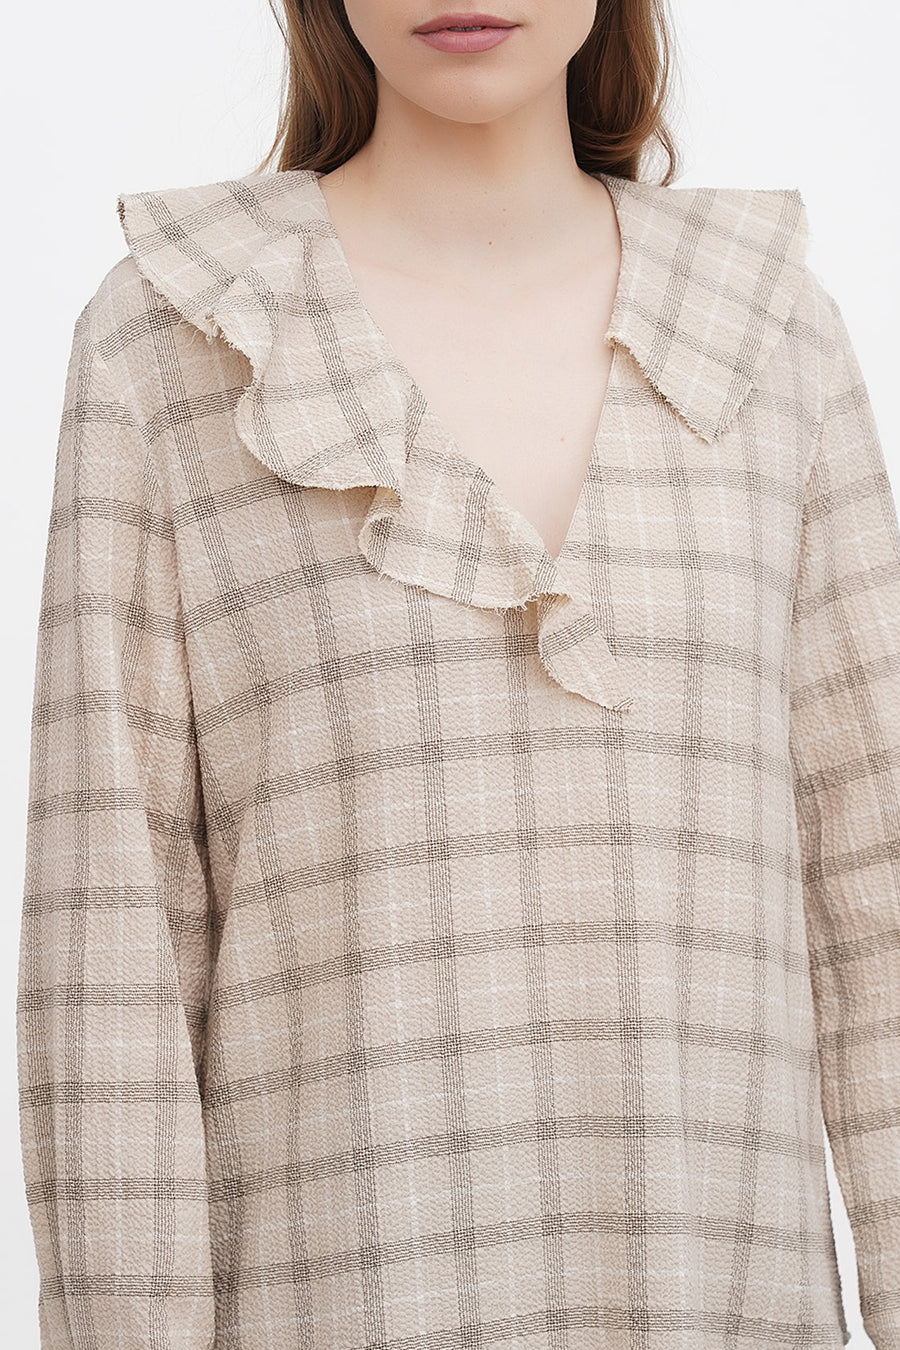 A Model Wearing Beige Organic Cotton Organic check wrinkled blouse, curated by Only Ethikal